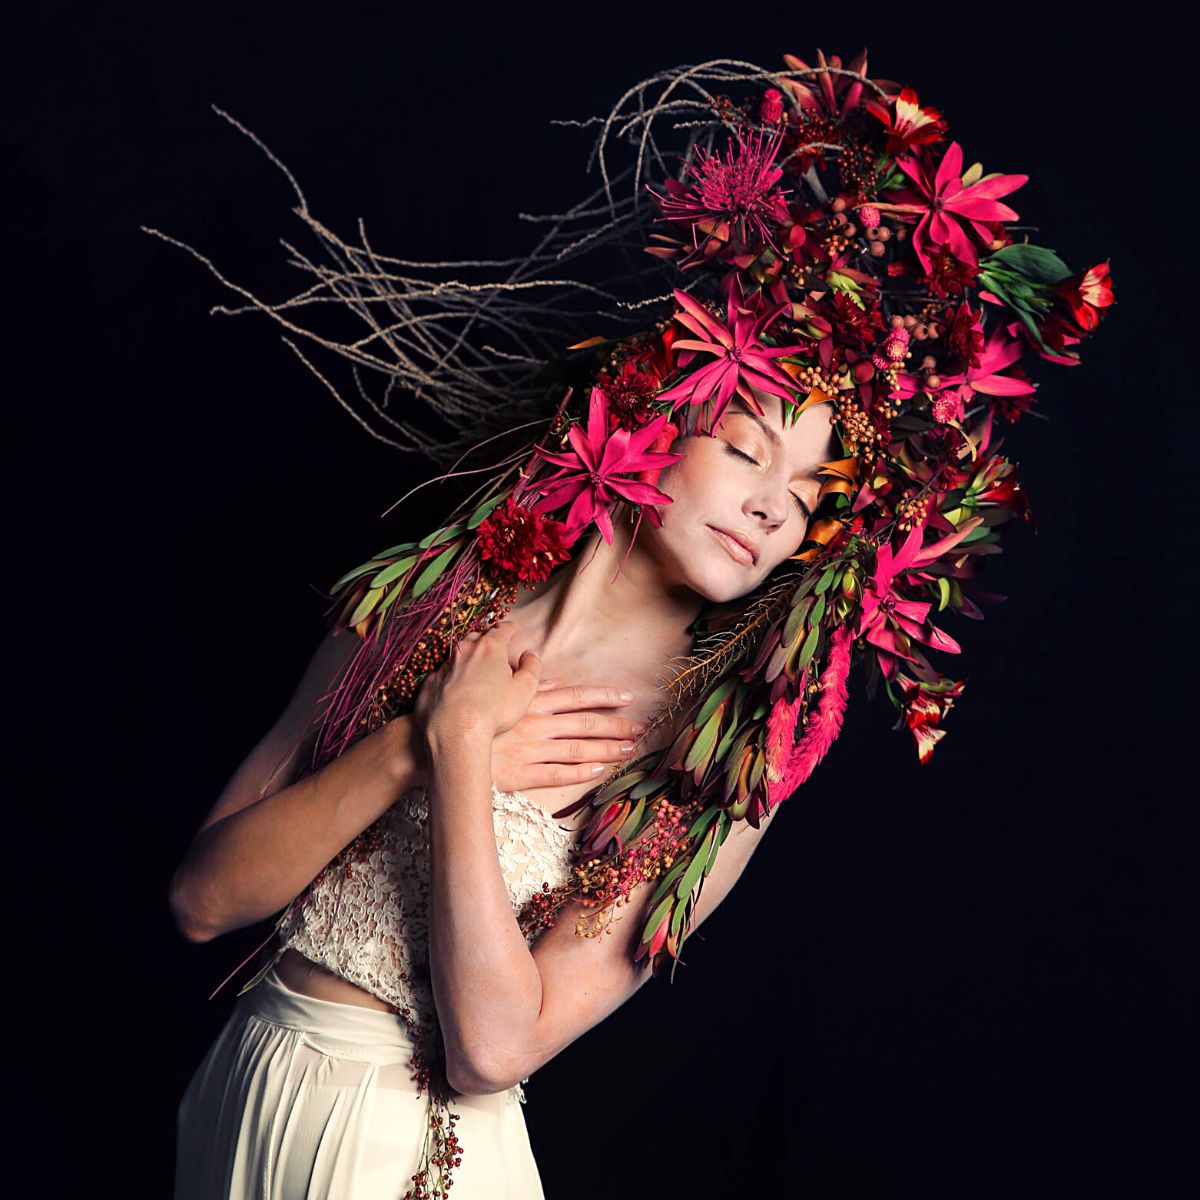 Floral Design Inspired by Nature, Emotions and Memories by Orit HertzF eatured on Thursd